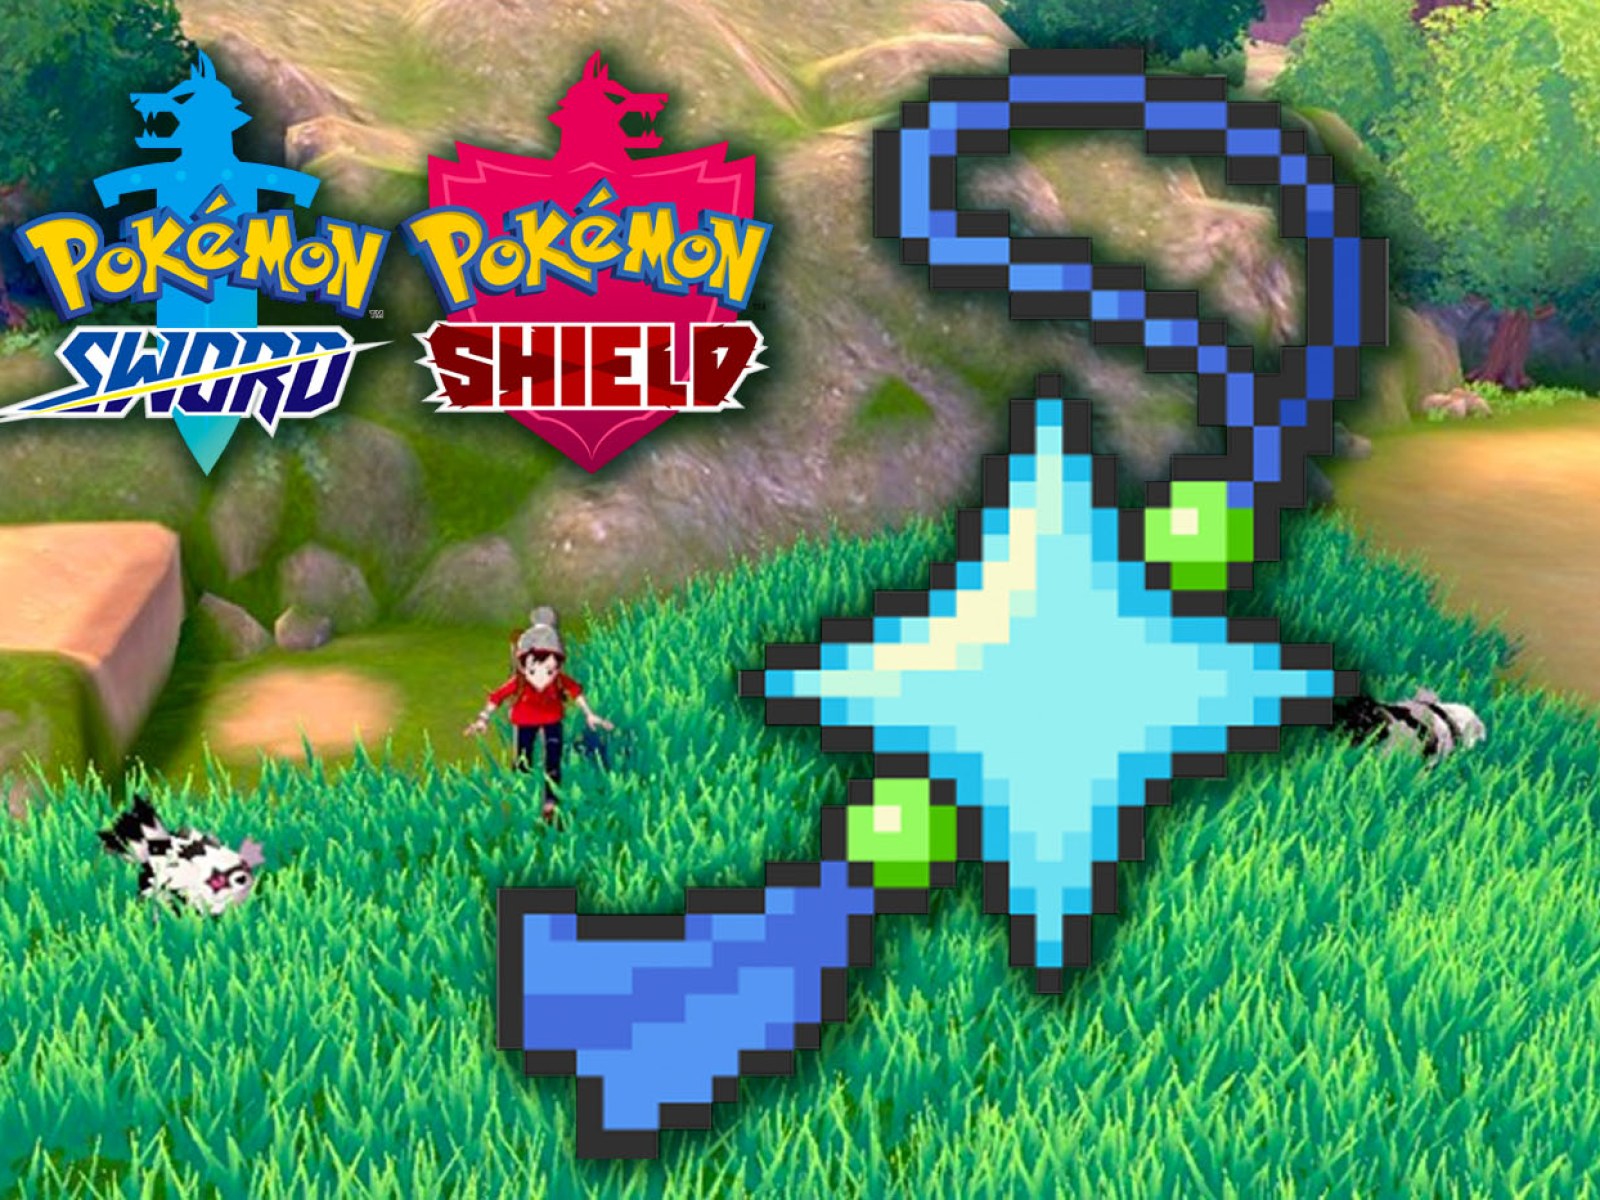 How to Get Shiny Pokemon - Star and Square - Pokemon Sword and Shield Guide  - IGN